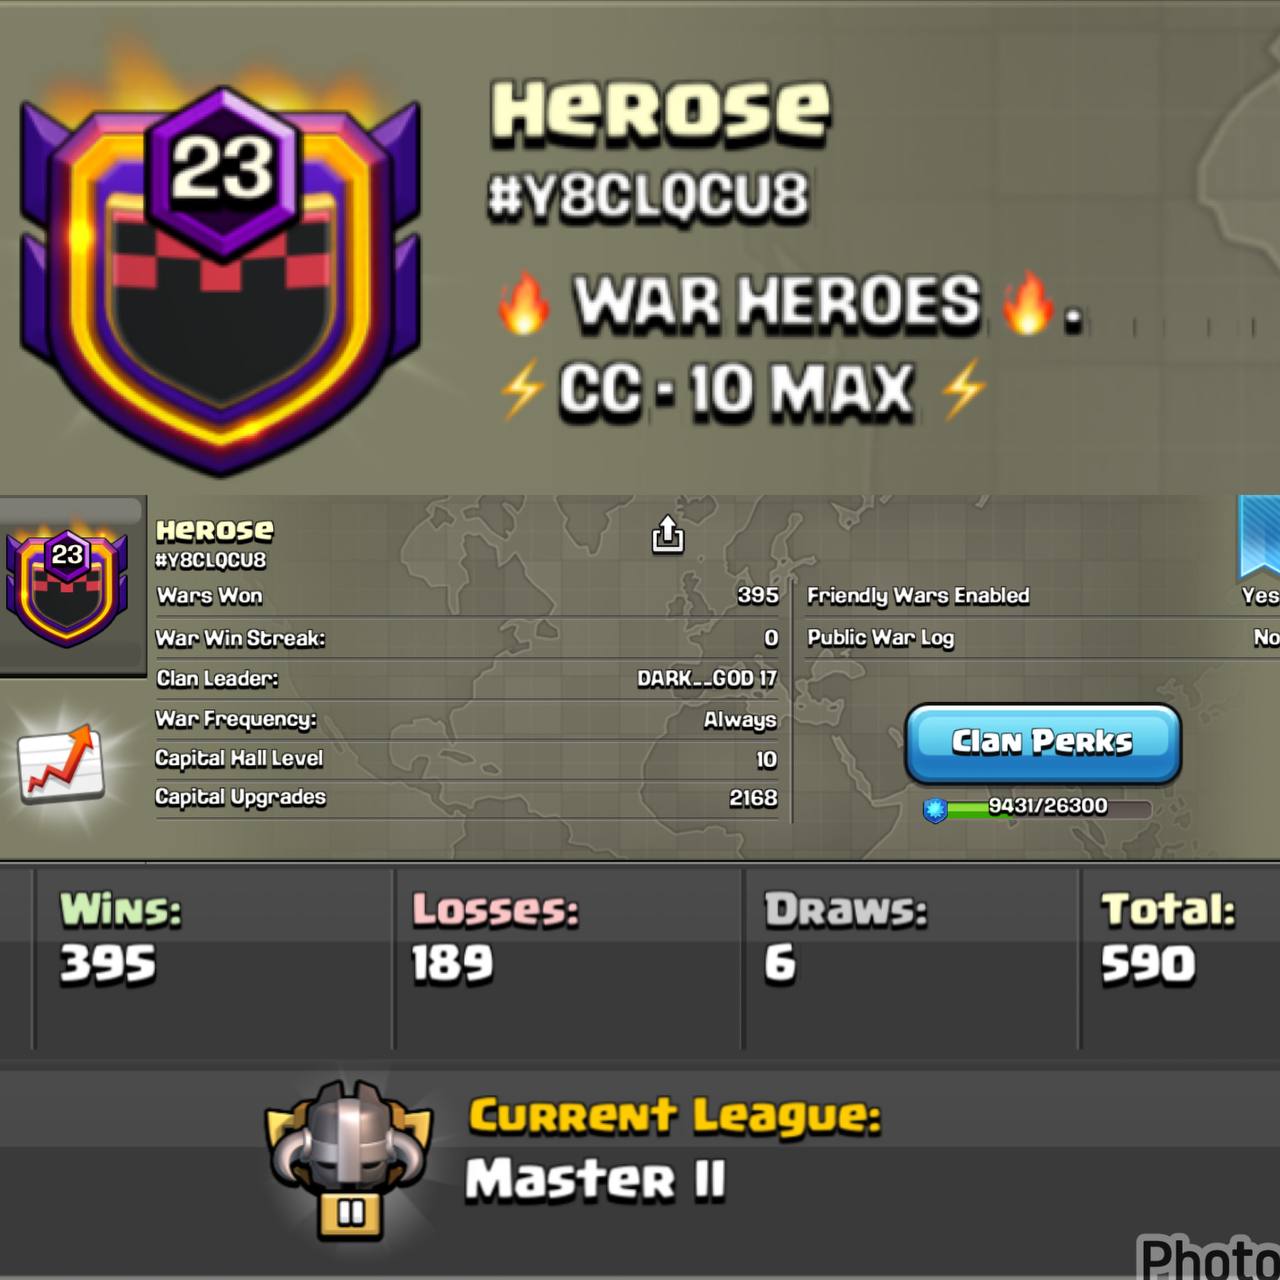 CC- 10 MAX | LEVEL - 23 | NAME - HEROSE l LEAGUE - MASTER 2 | ENGLISH NAME | WAR LOG - 395 : 189 | AMAZING NAME & LOG | INSTANT DELIVERY